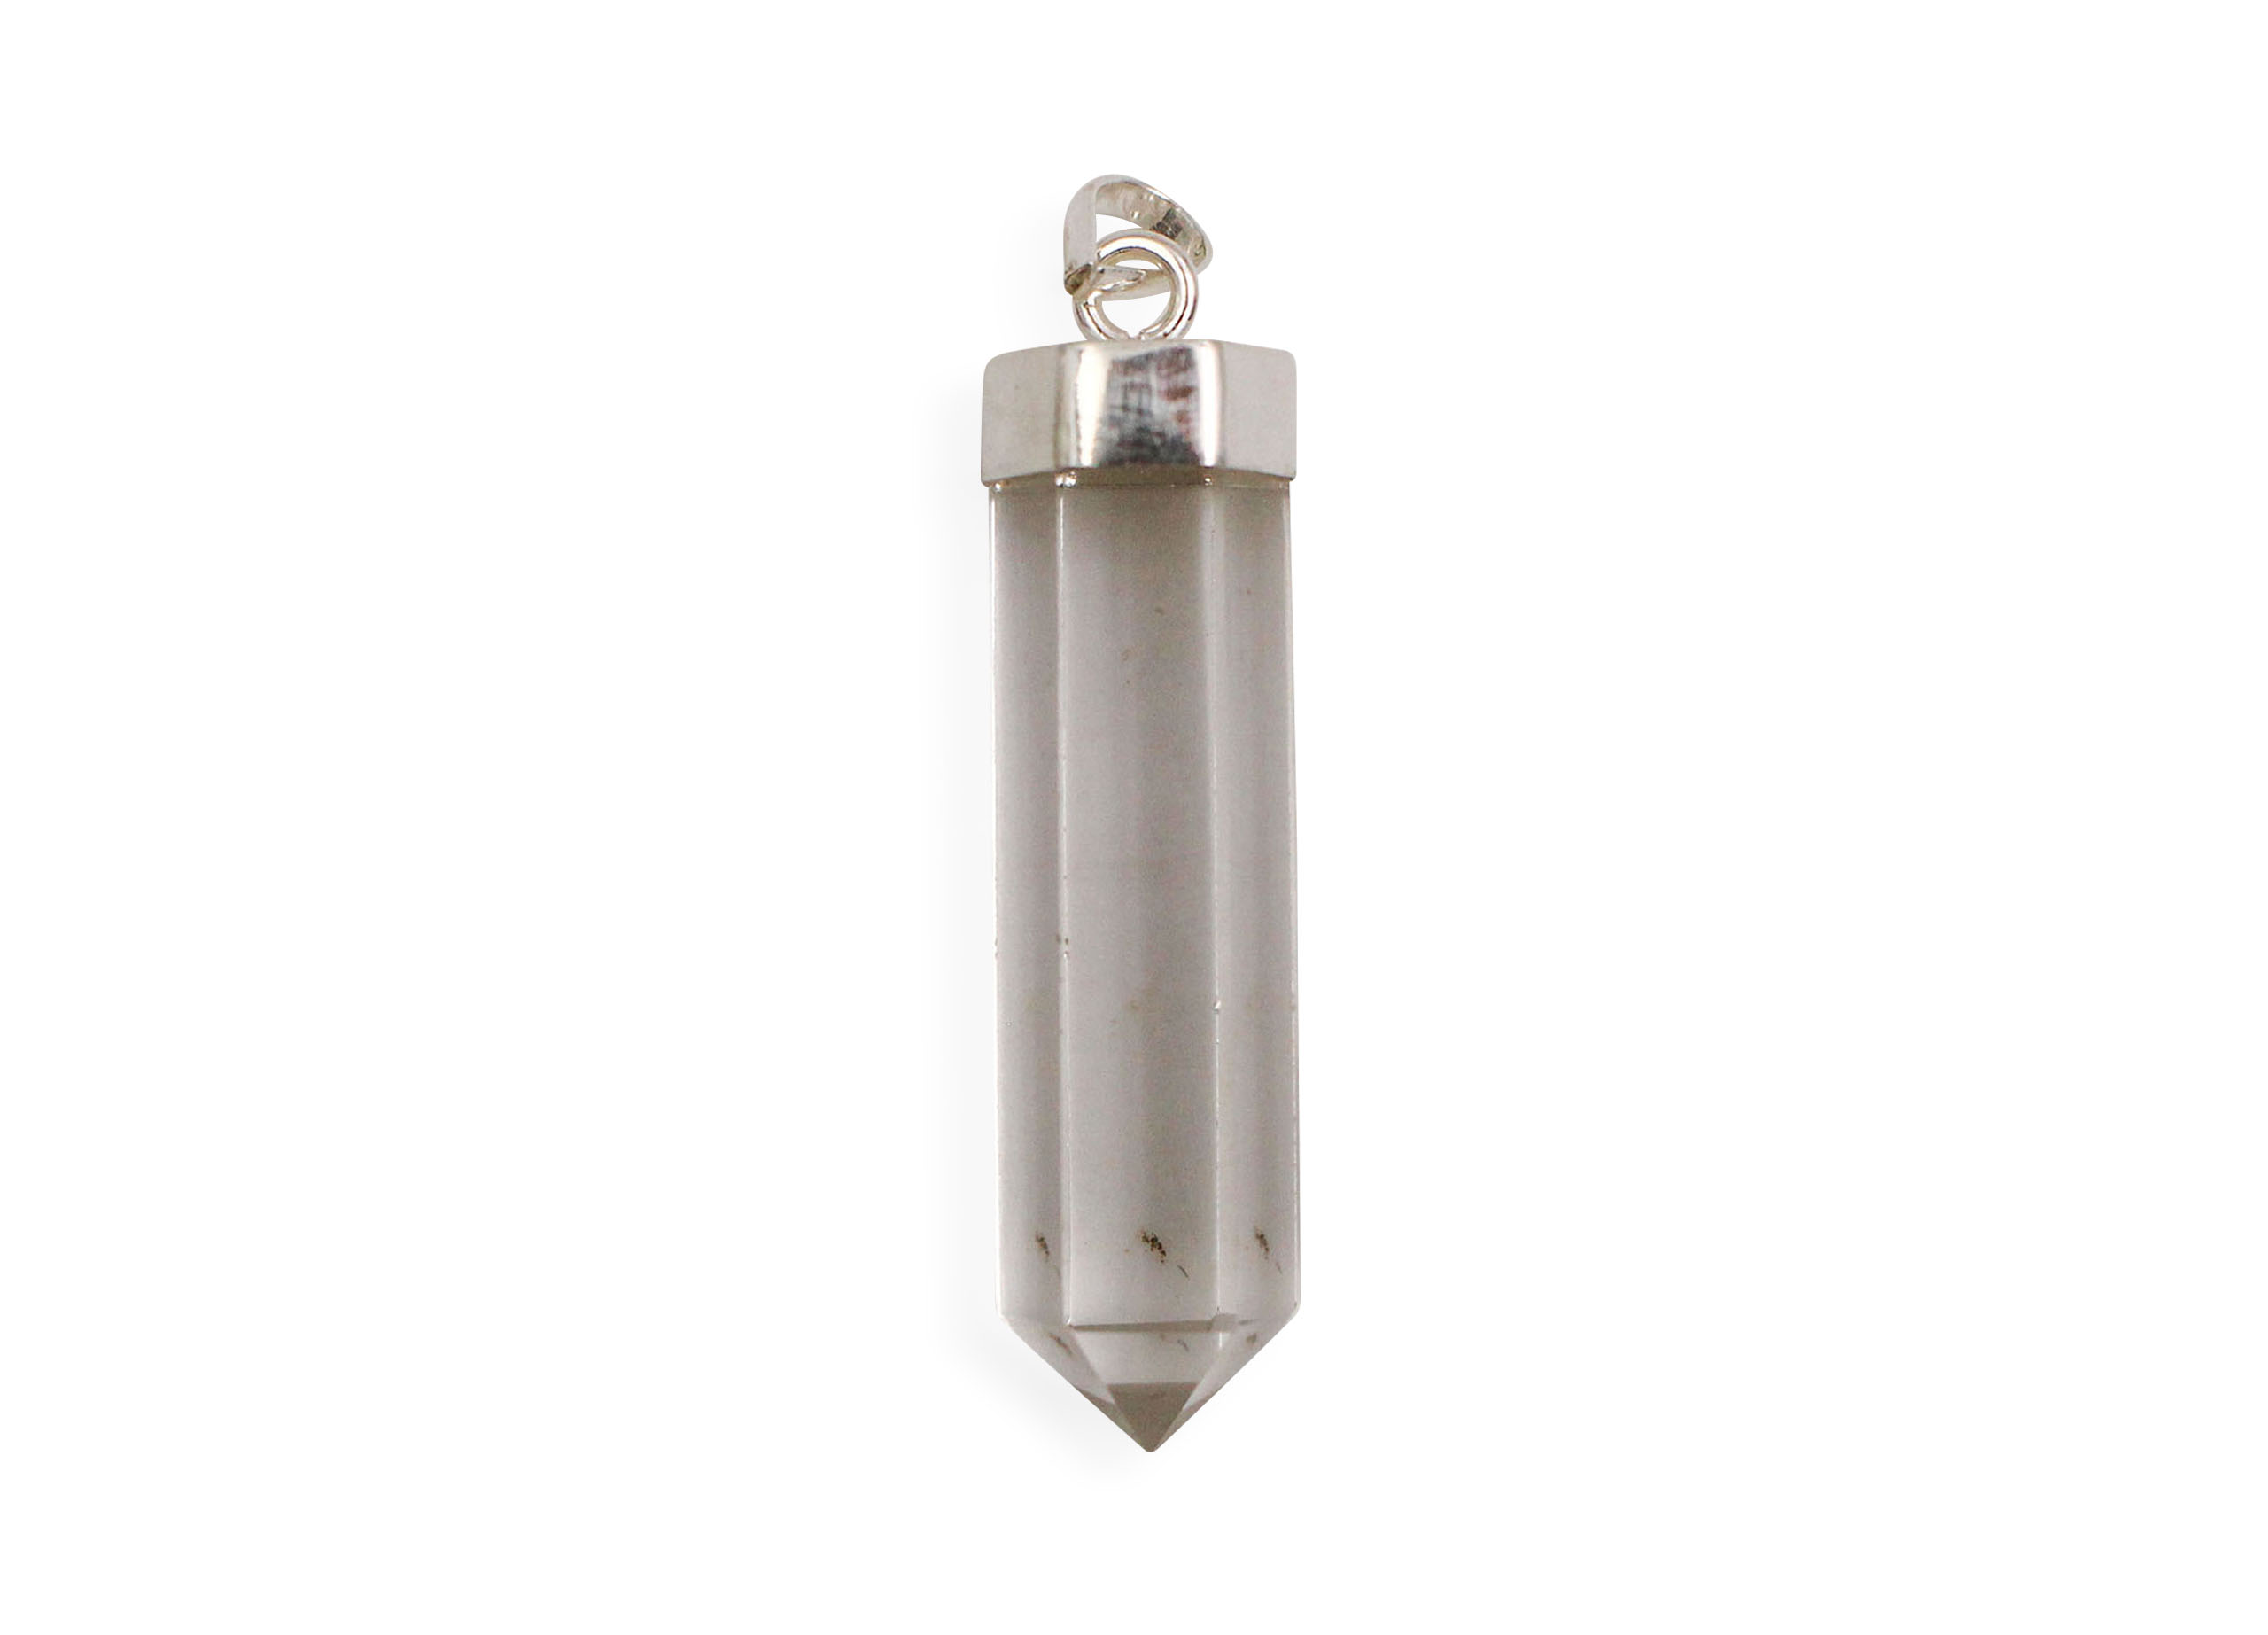 Clear Quartz Polished Point Cap Pendant Sterling Silver - Crystal Dreams